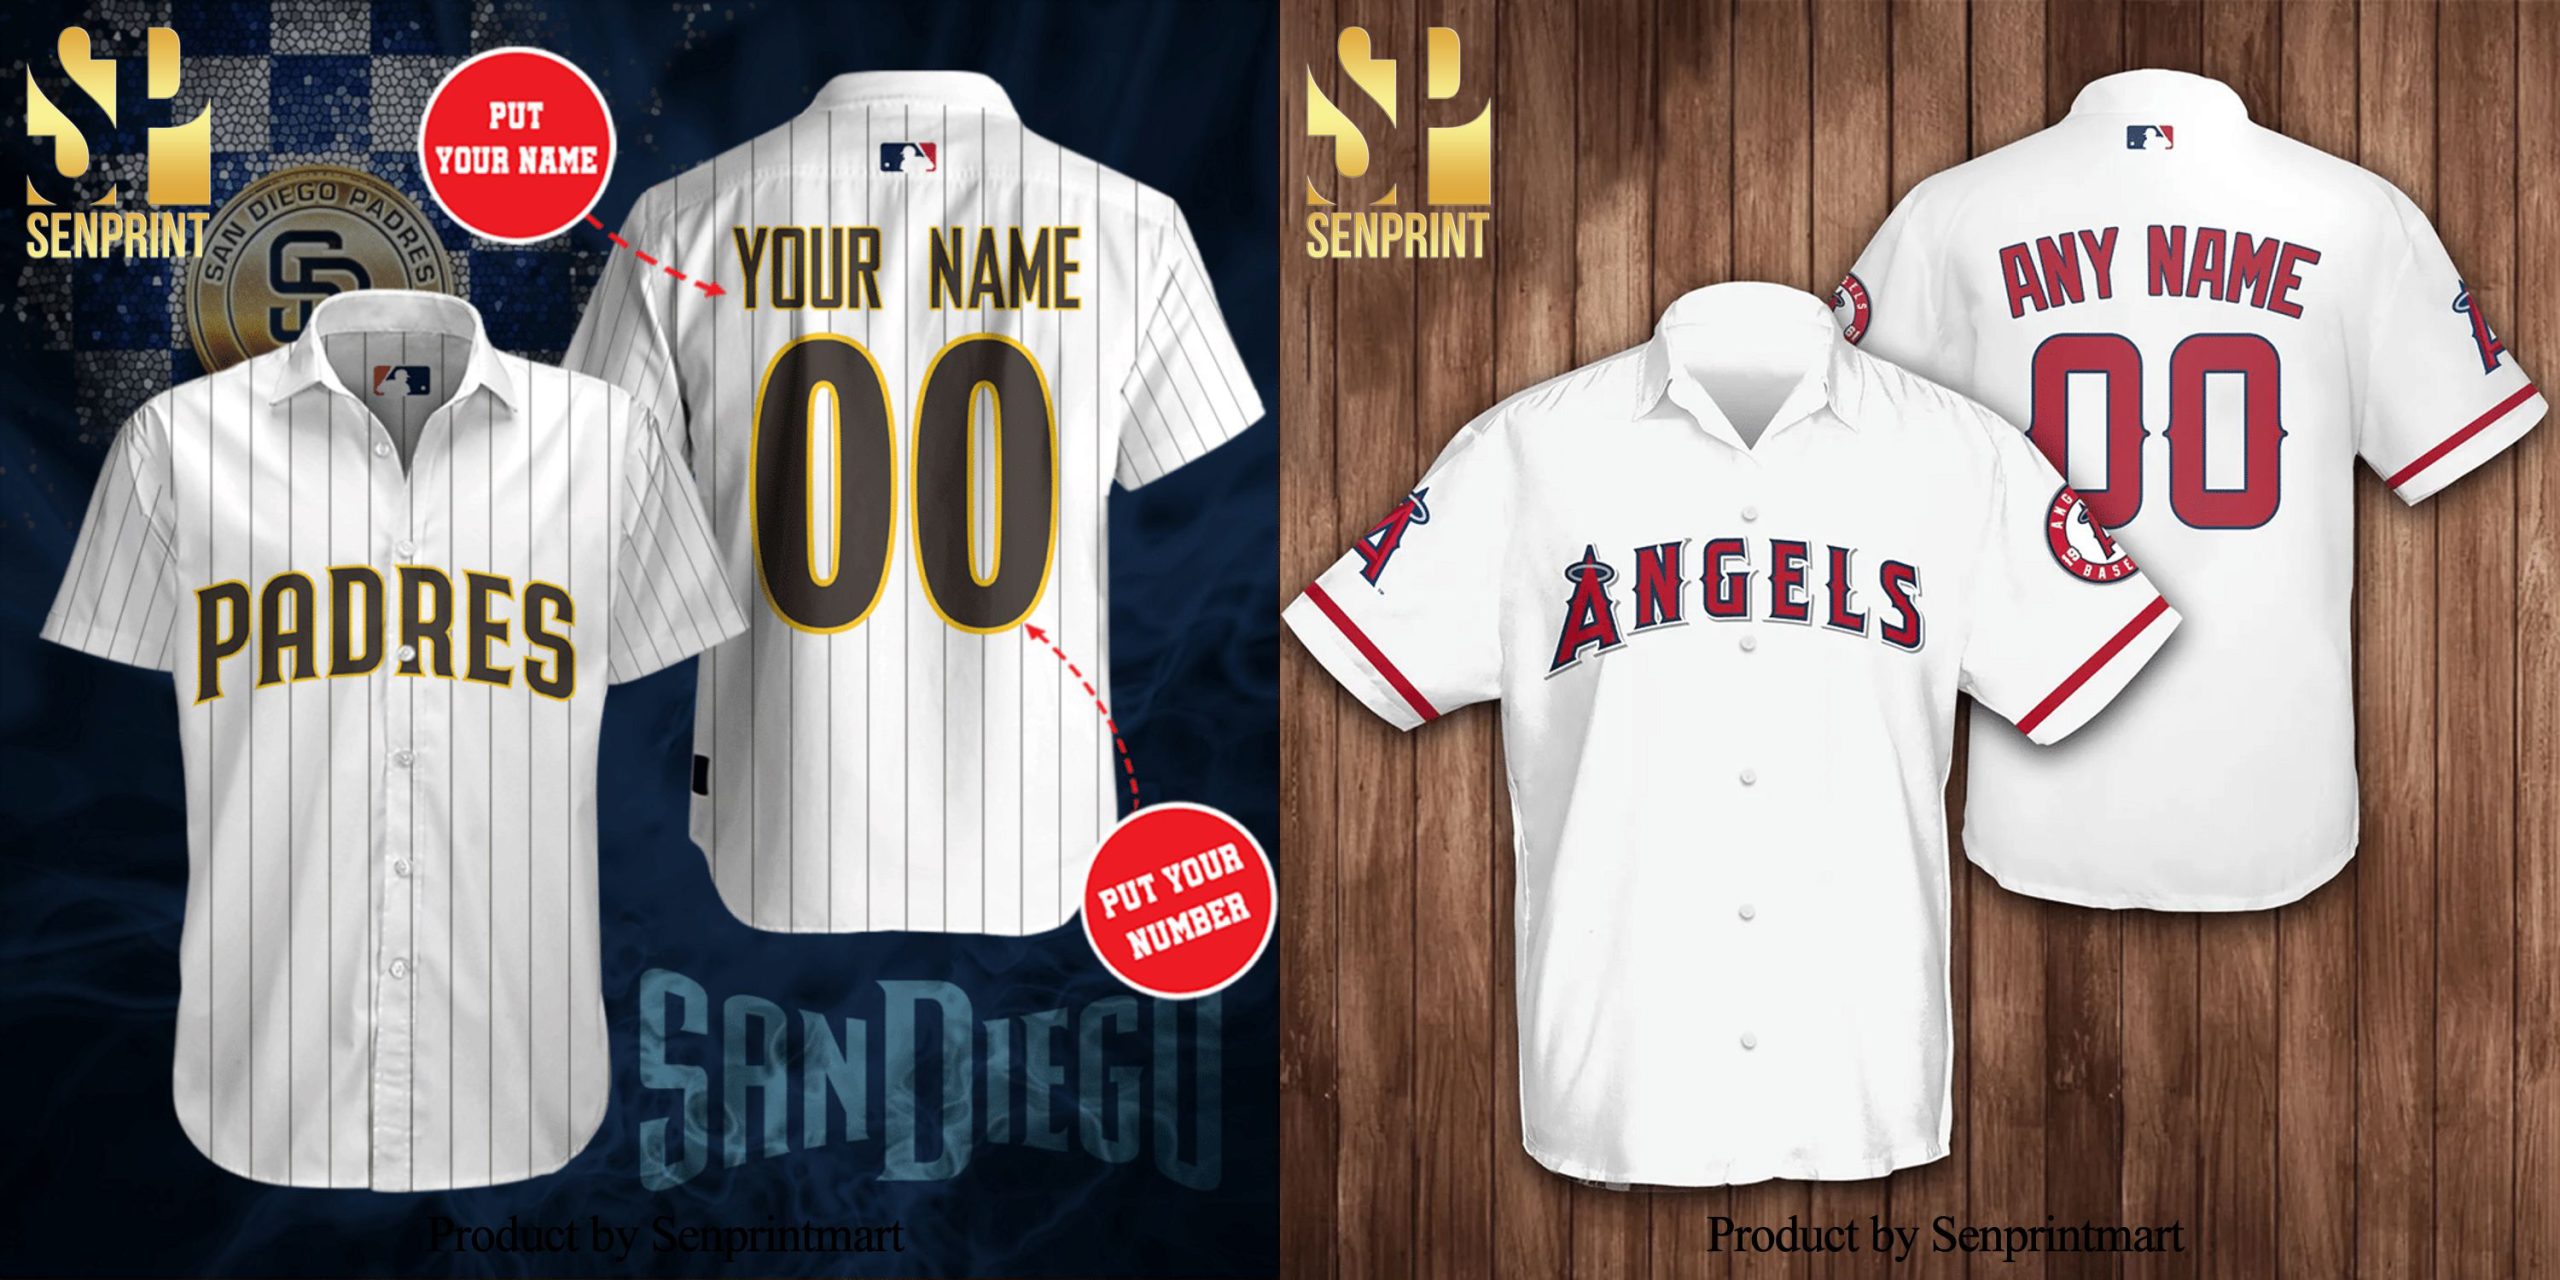 The Battle of California: San Diego Padres vs. Los Angeles Angels